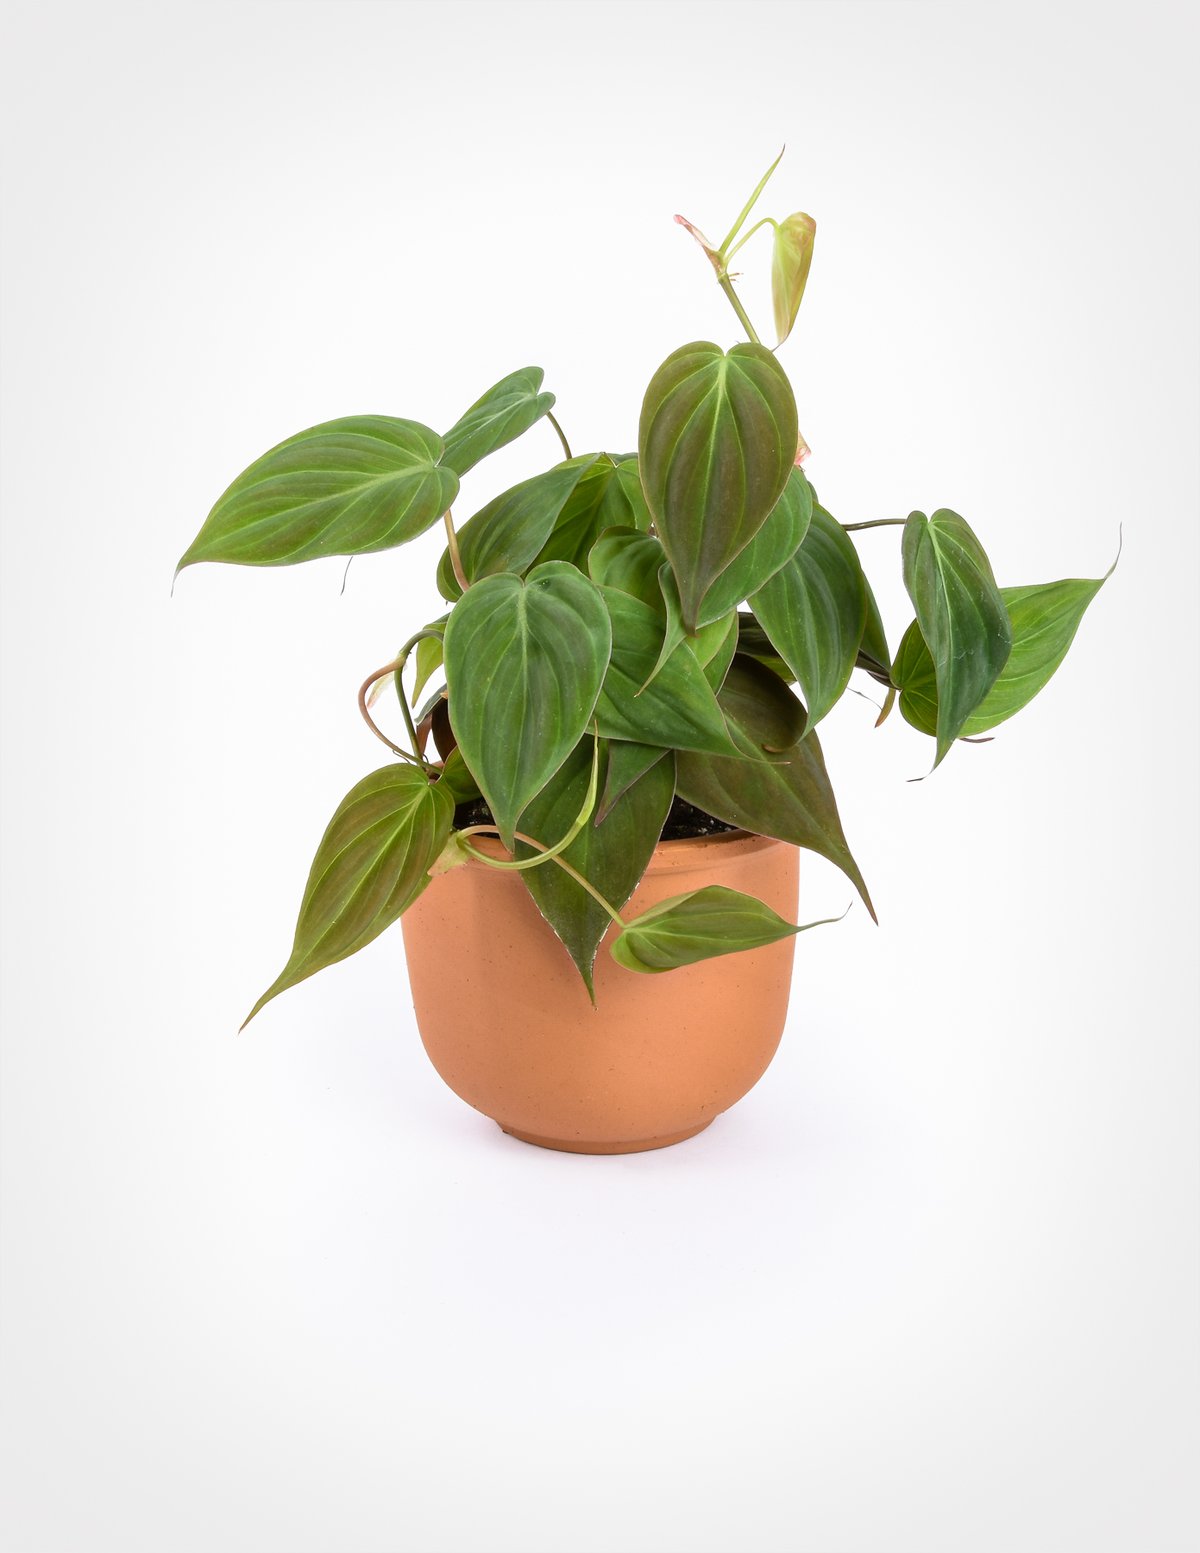 Potted plant with elongated heart-shaped leaves. The leaves are a bright green to purplish hue.